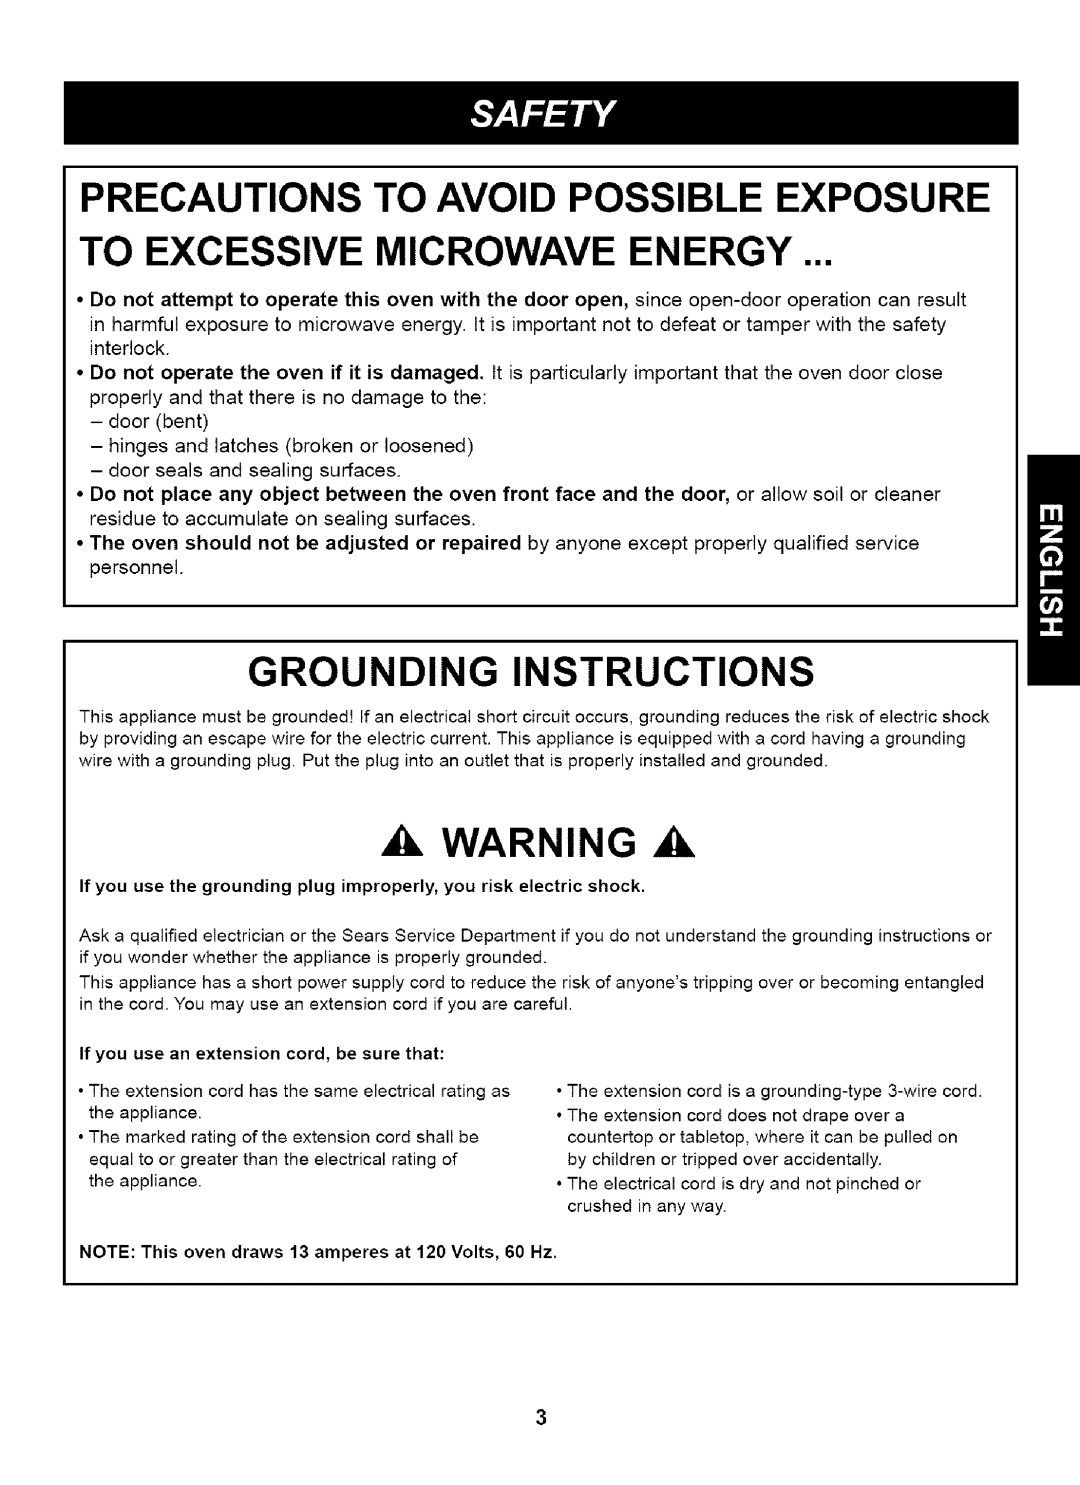 Kenmore 721.65223, 721.65222 Precautions To Avoid Possible Exposure, To Excessive Microwave Energy, Grounding Instructions 